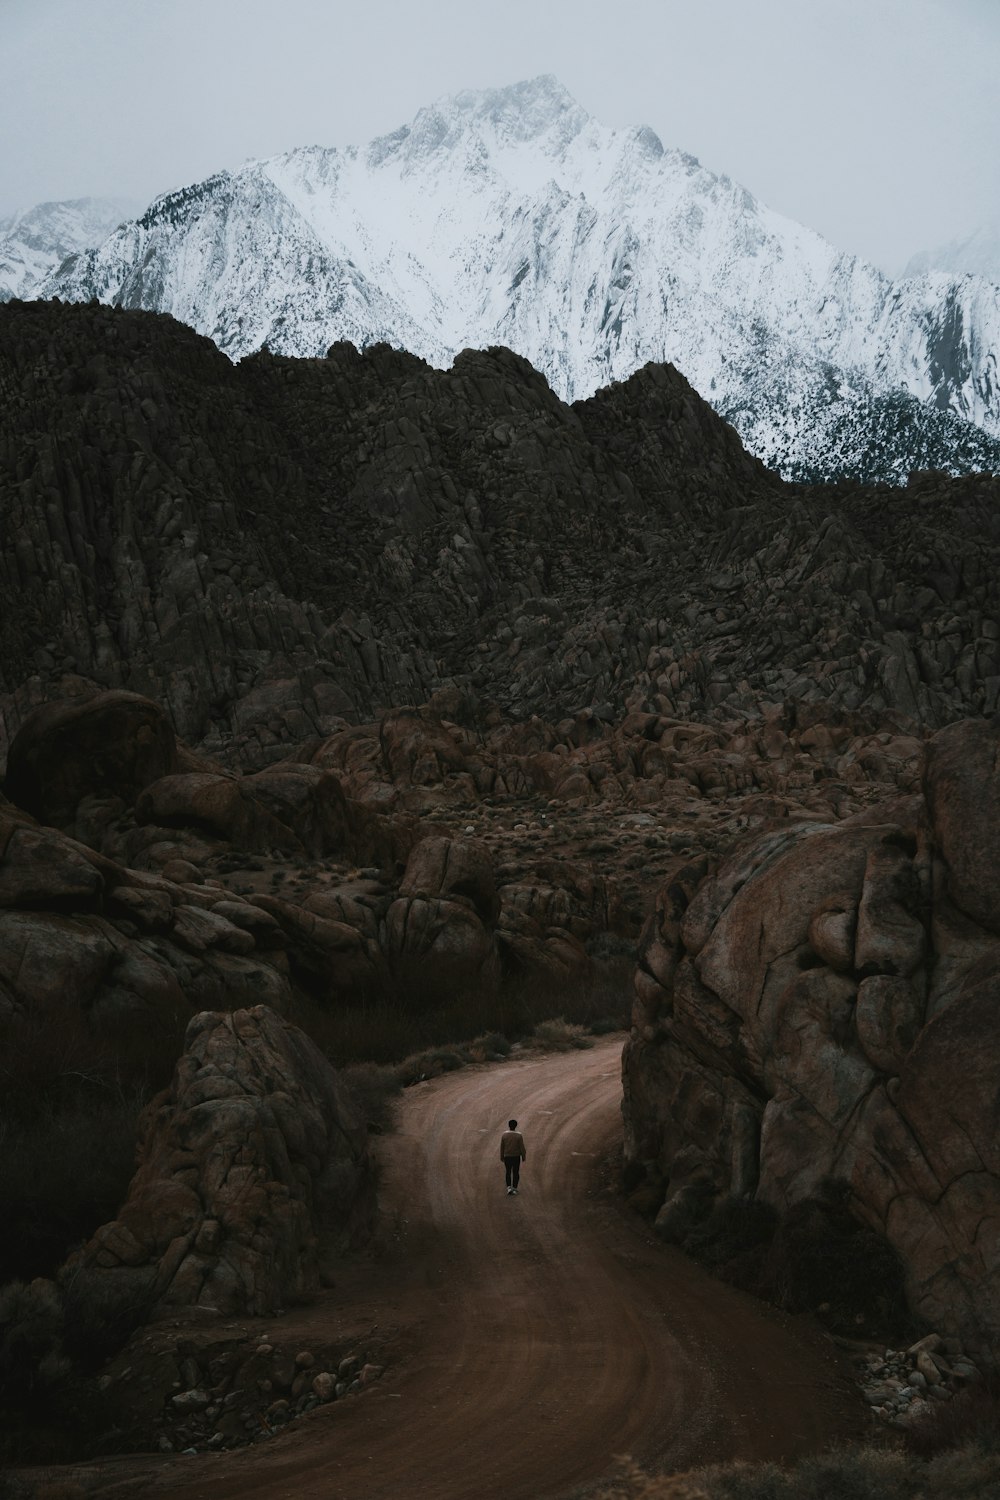 a person walking down a dirt road in front of a mountain